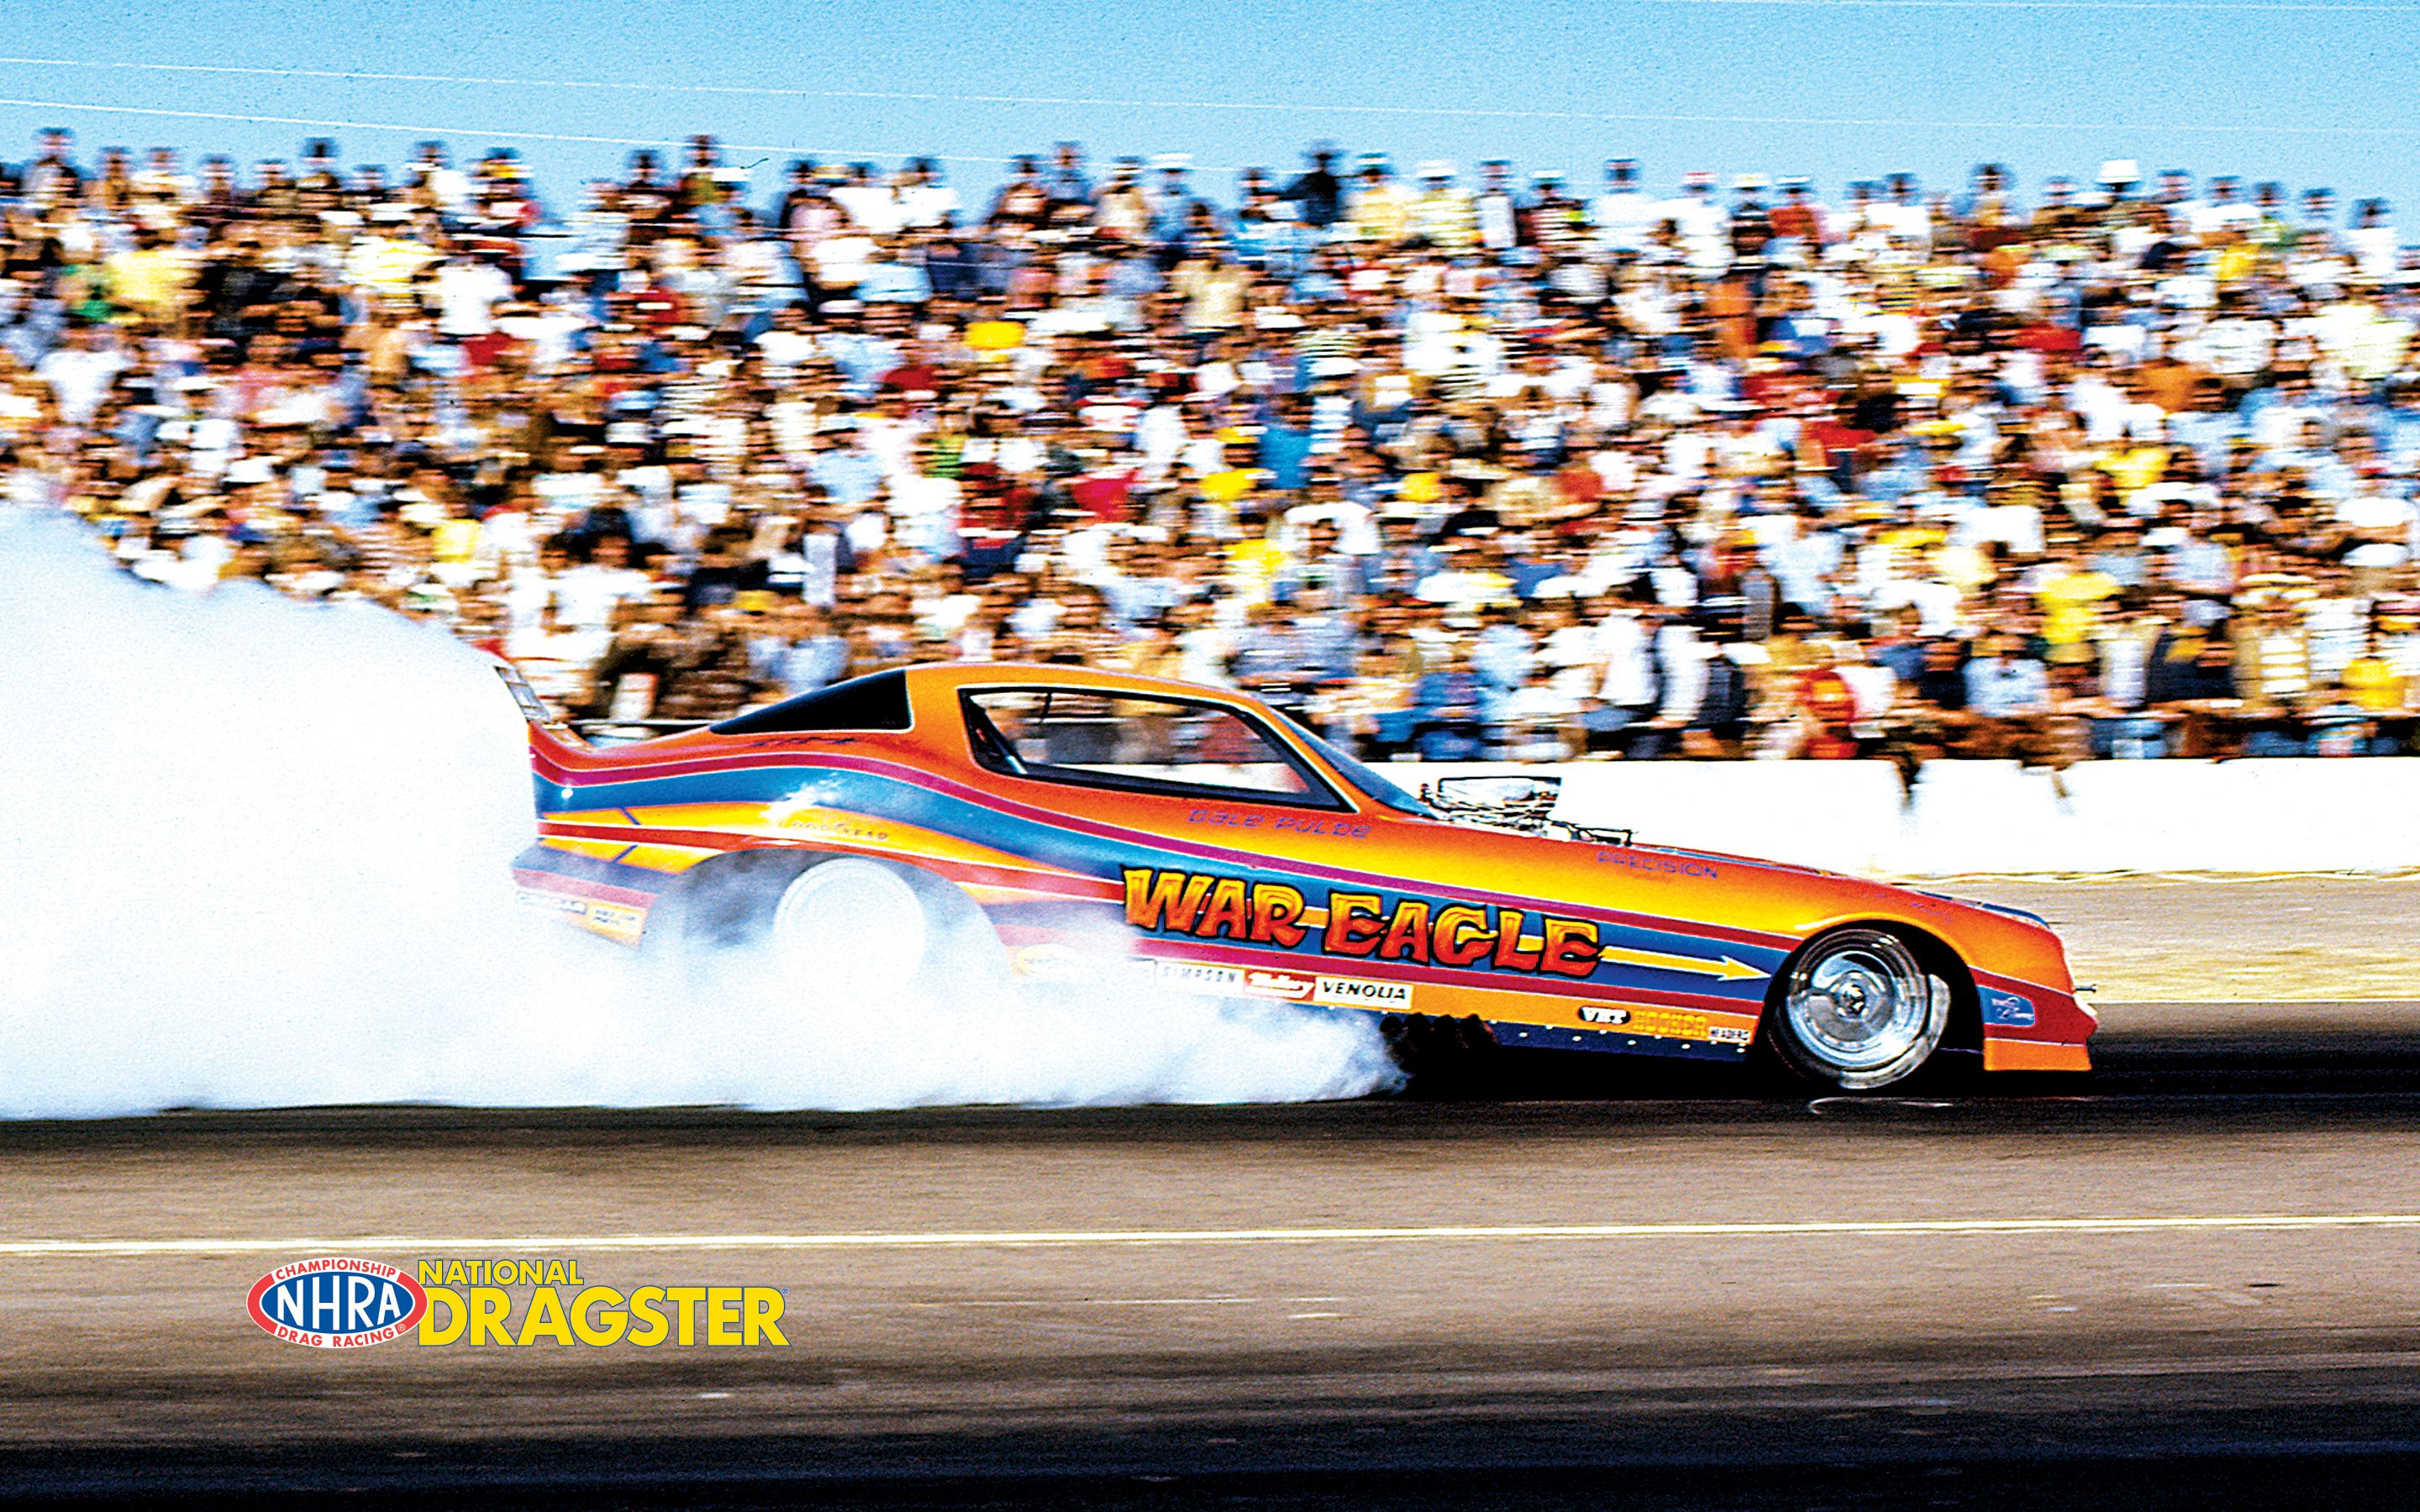 unlimited money and gold for pro series drag racing